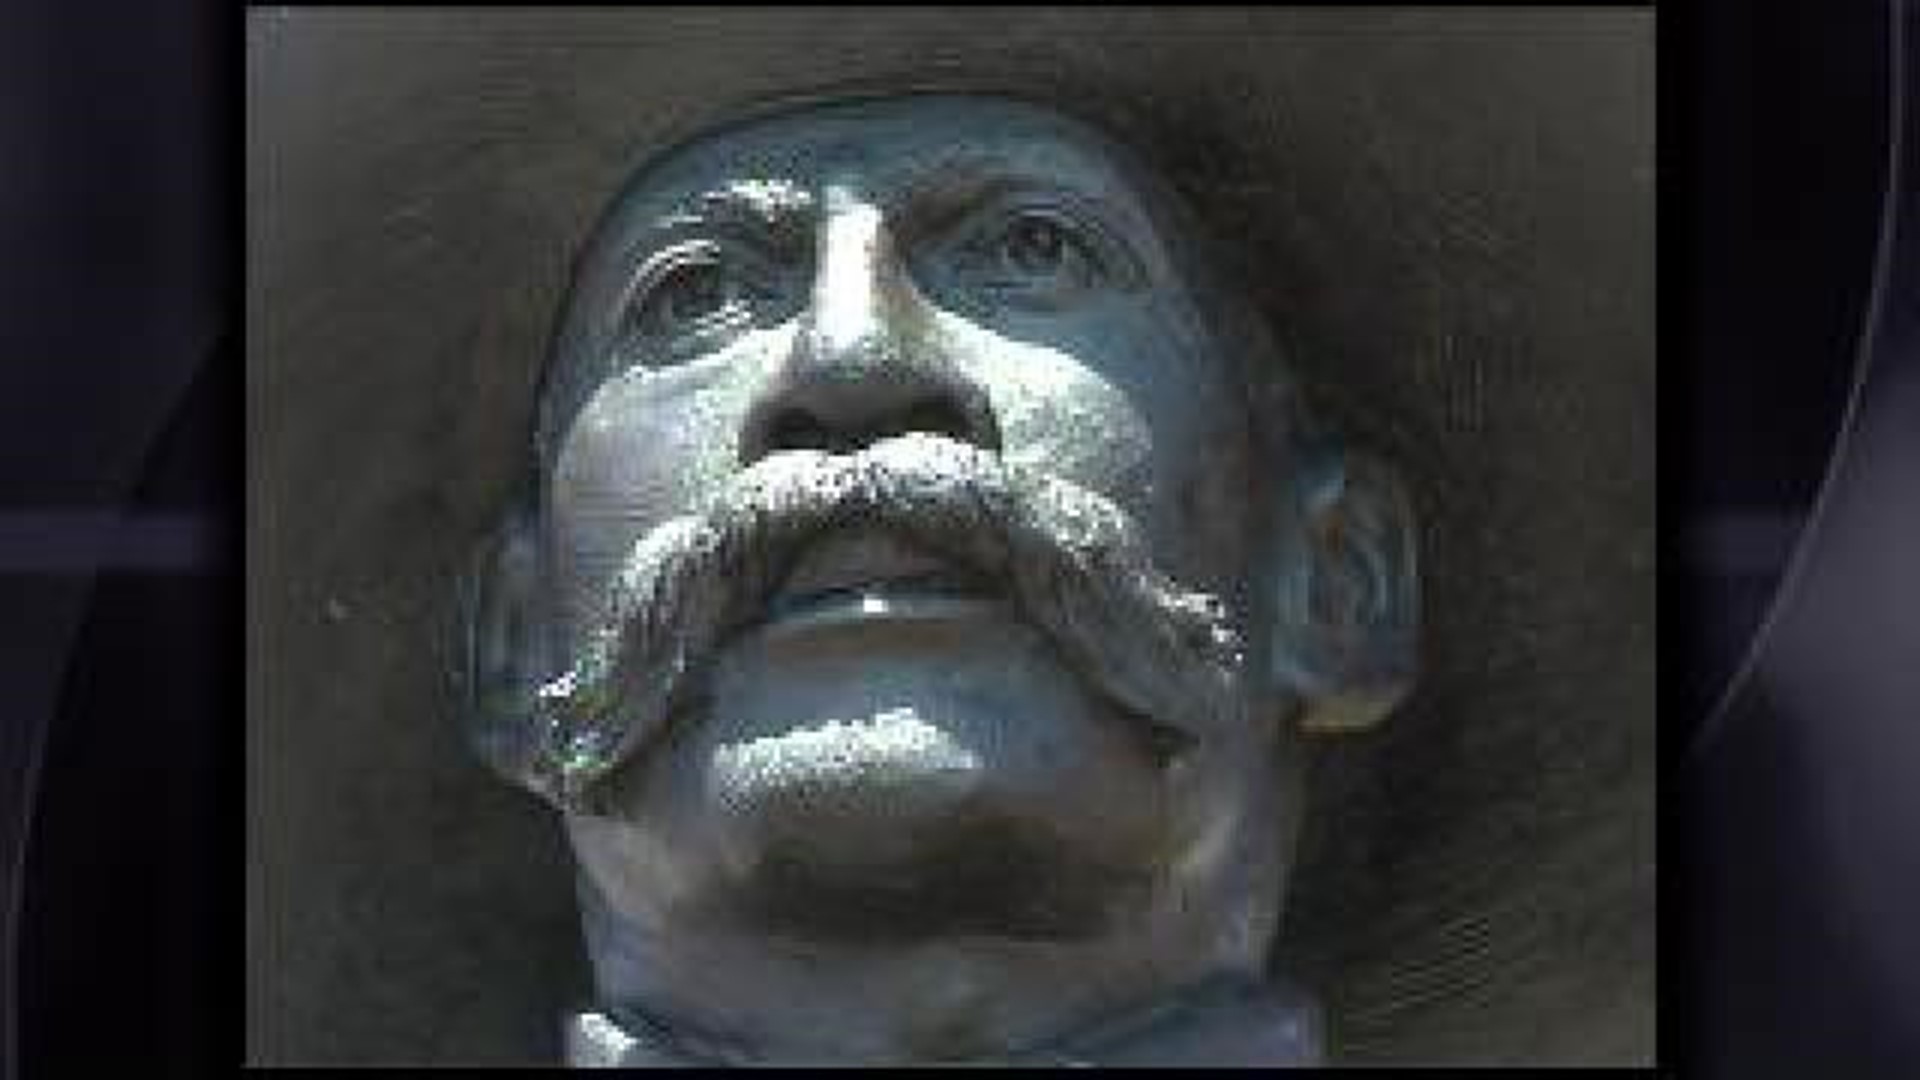 Sculpture Artist Arrives With Bass Reeves Monument